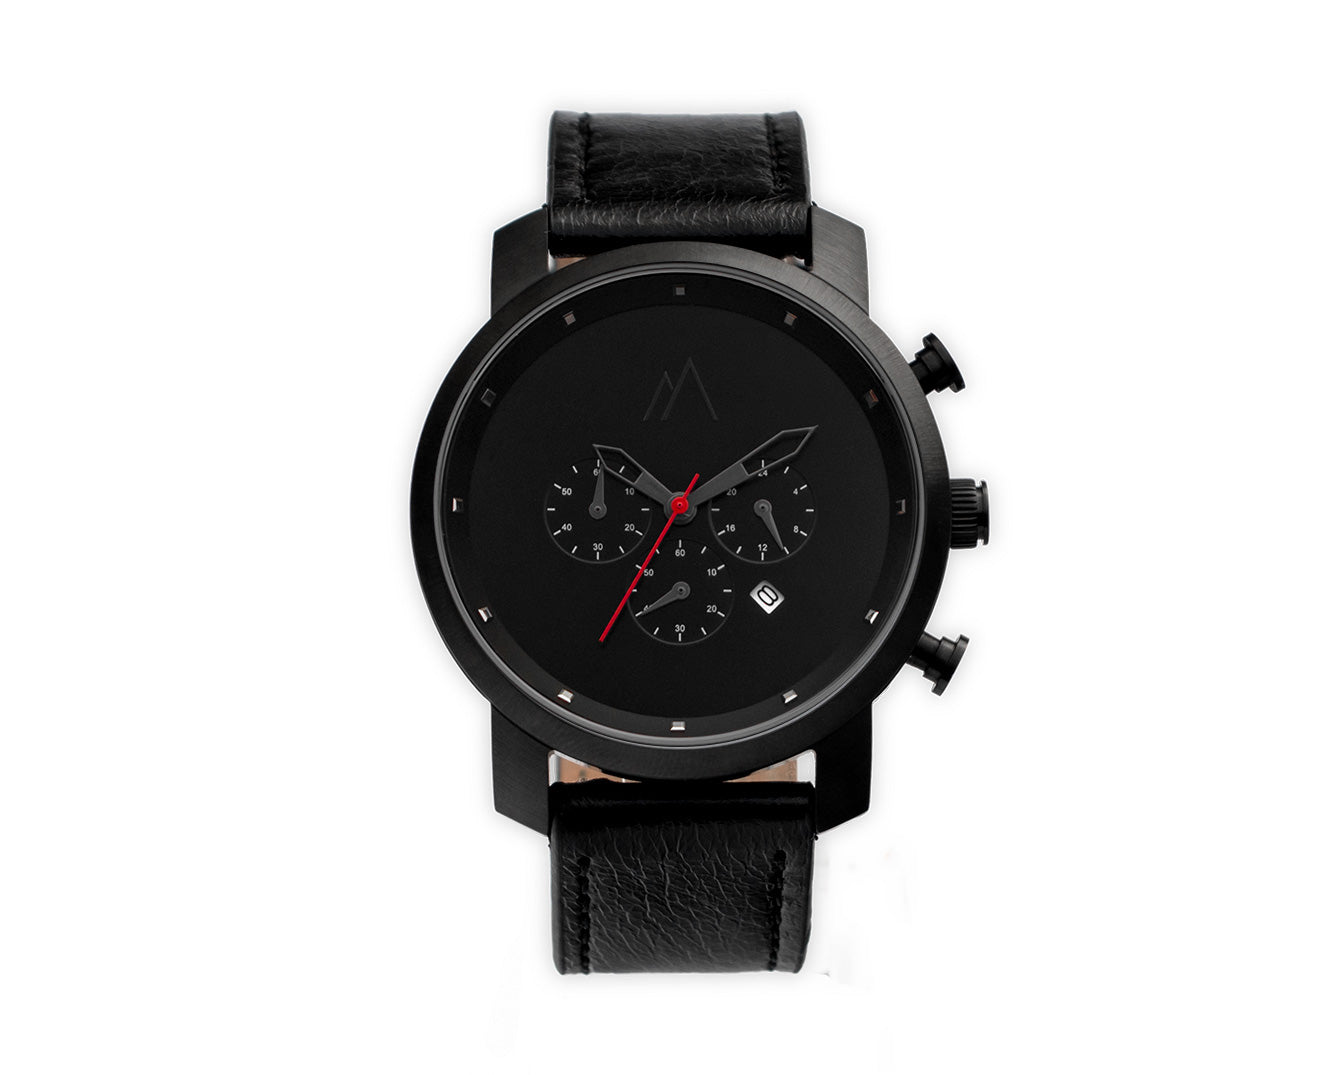 Quartz chronograph date watch black and red